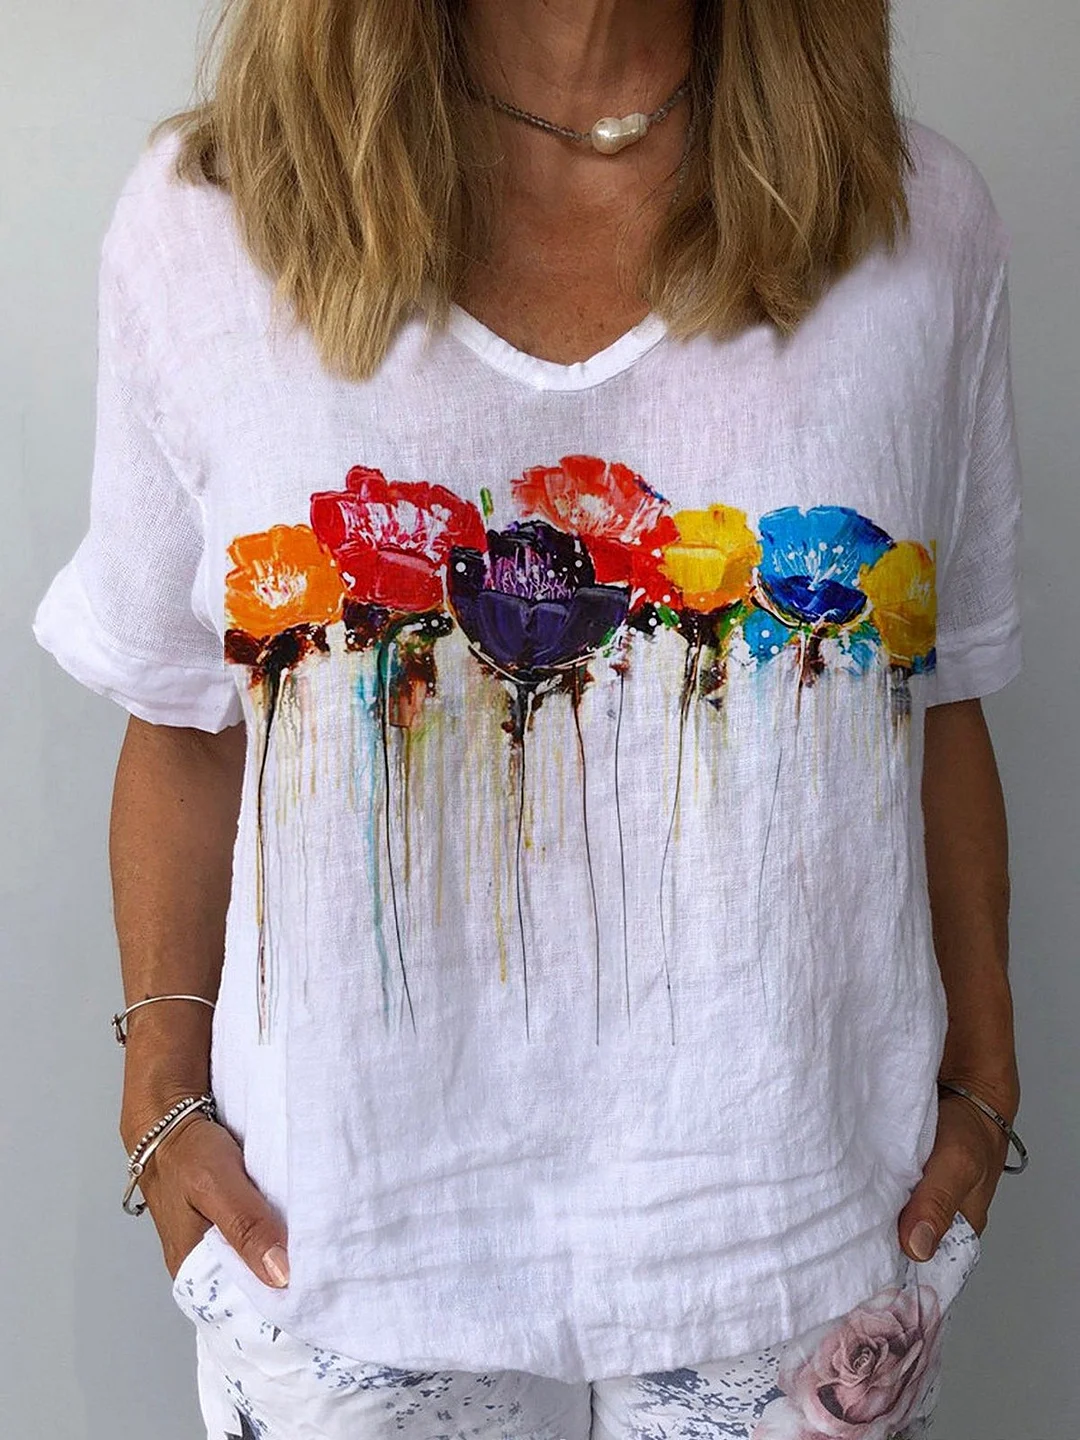 Women's short sleeve v-neck t-shirt, summer dragonfly floral print tunic Top, tie dye casual loose shirt Blouse cotton tunic tee stylish streetwear